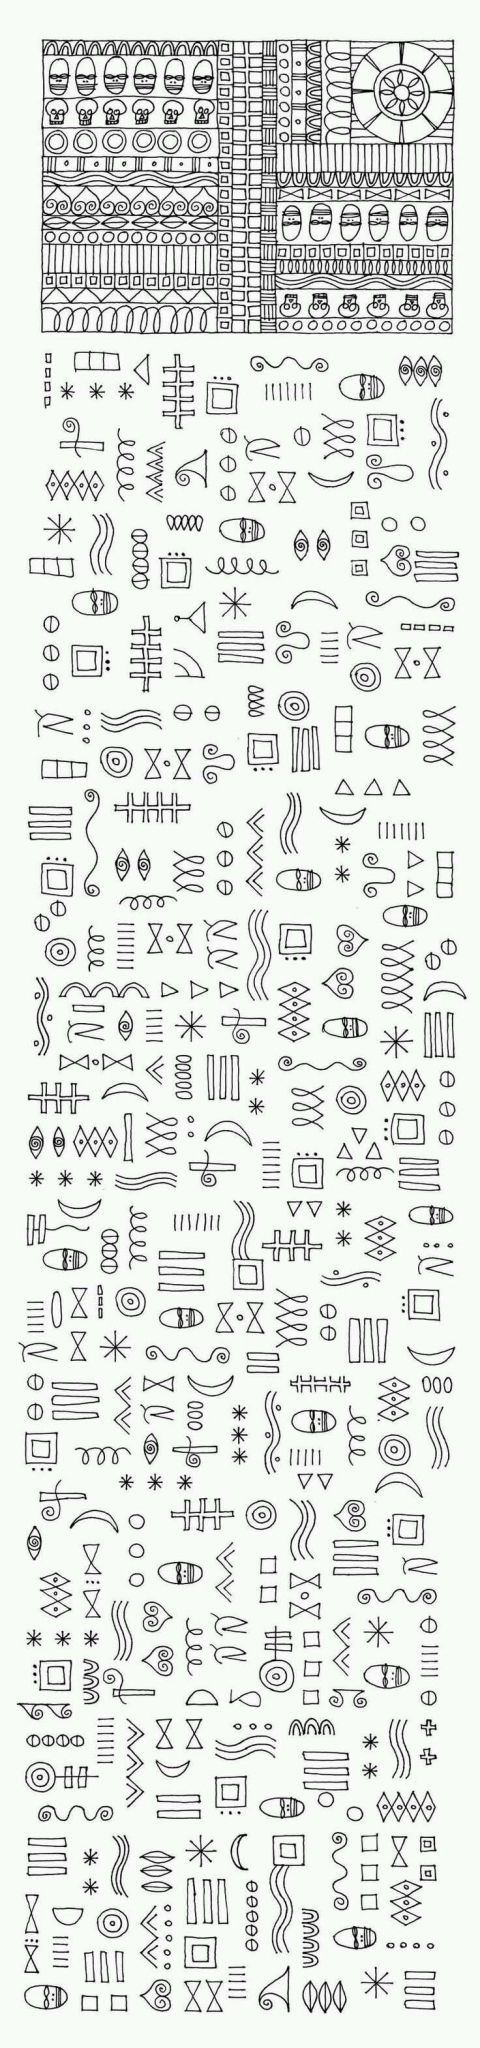 Growing Patterns Worksheets Along with 149 Best Doodles Images On Pinterest